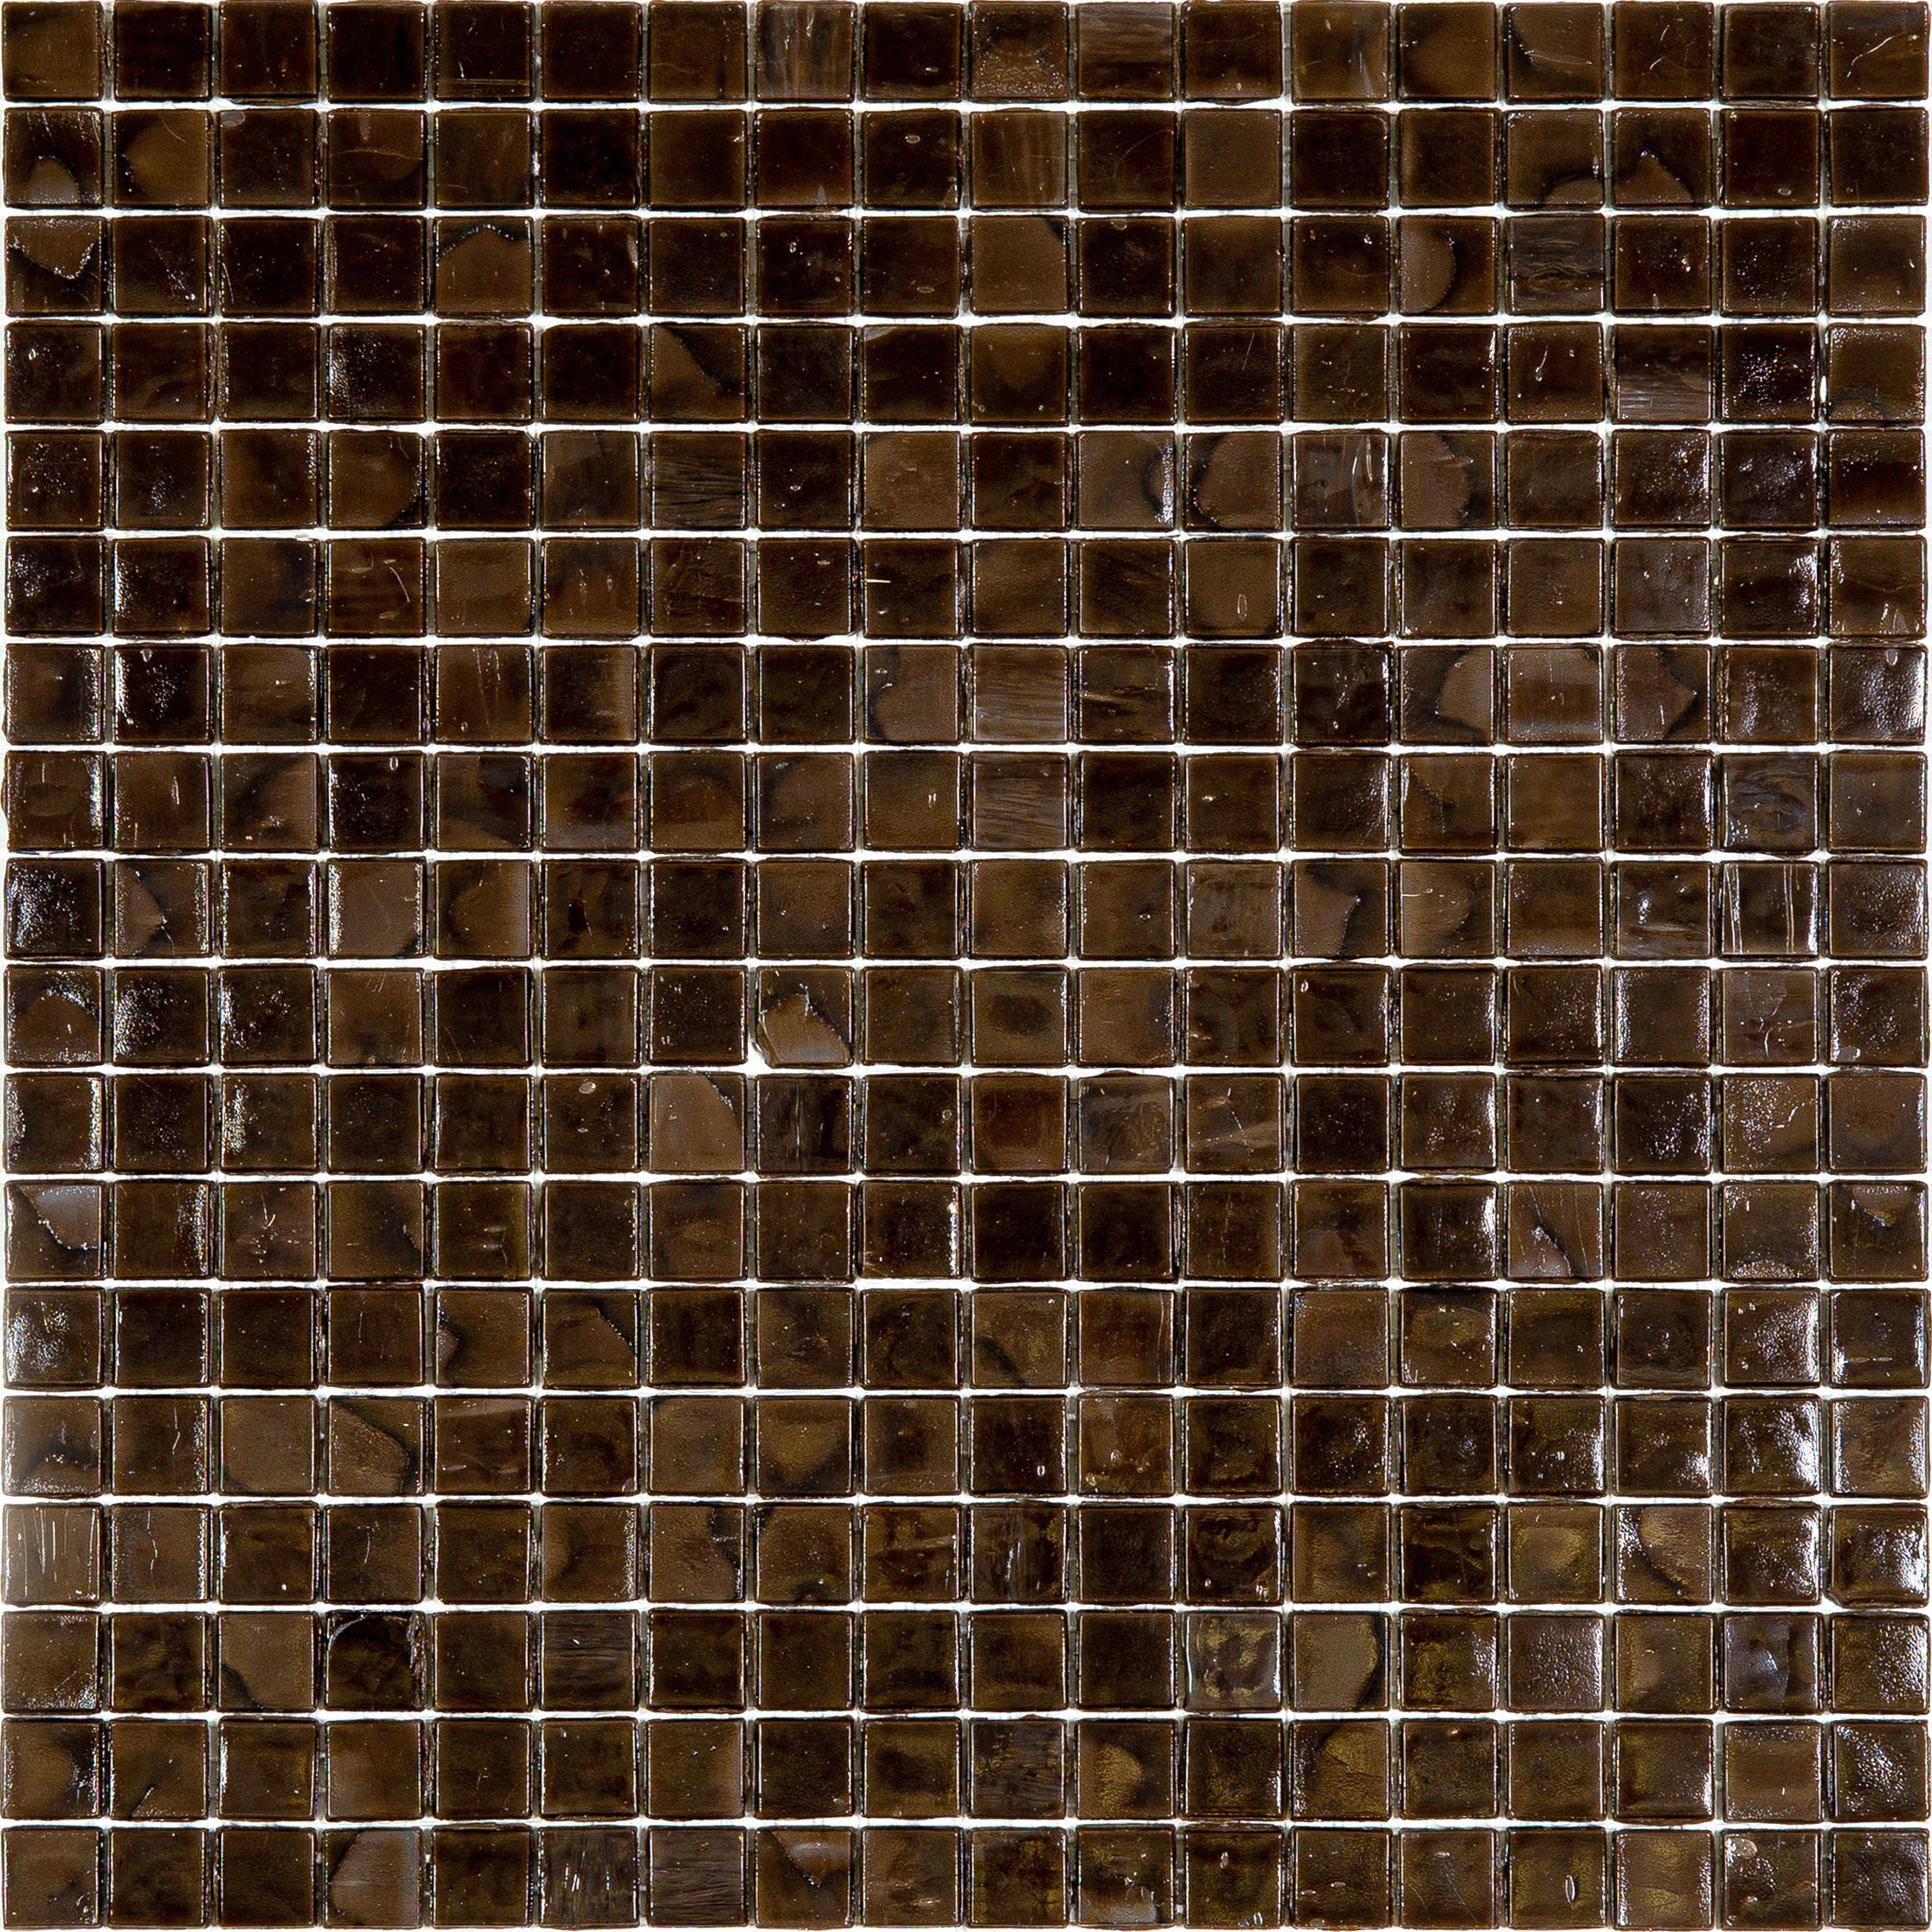 mir alma solid colors 0_6 inch nibble n51 wall and floor mosaic distributed by surface group natural materials